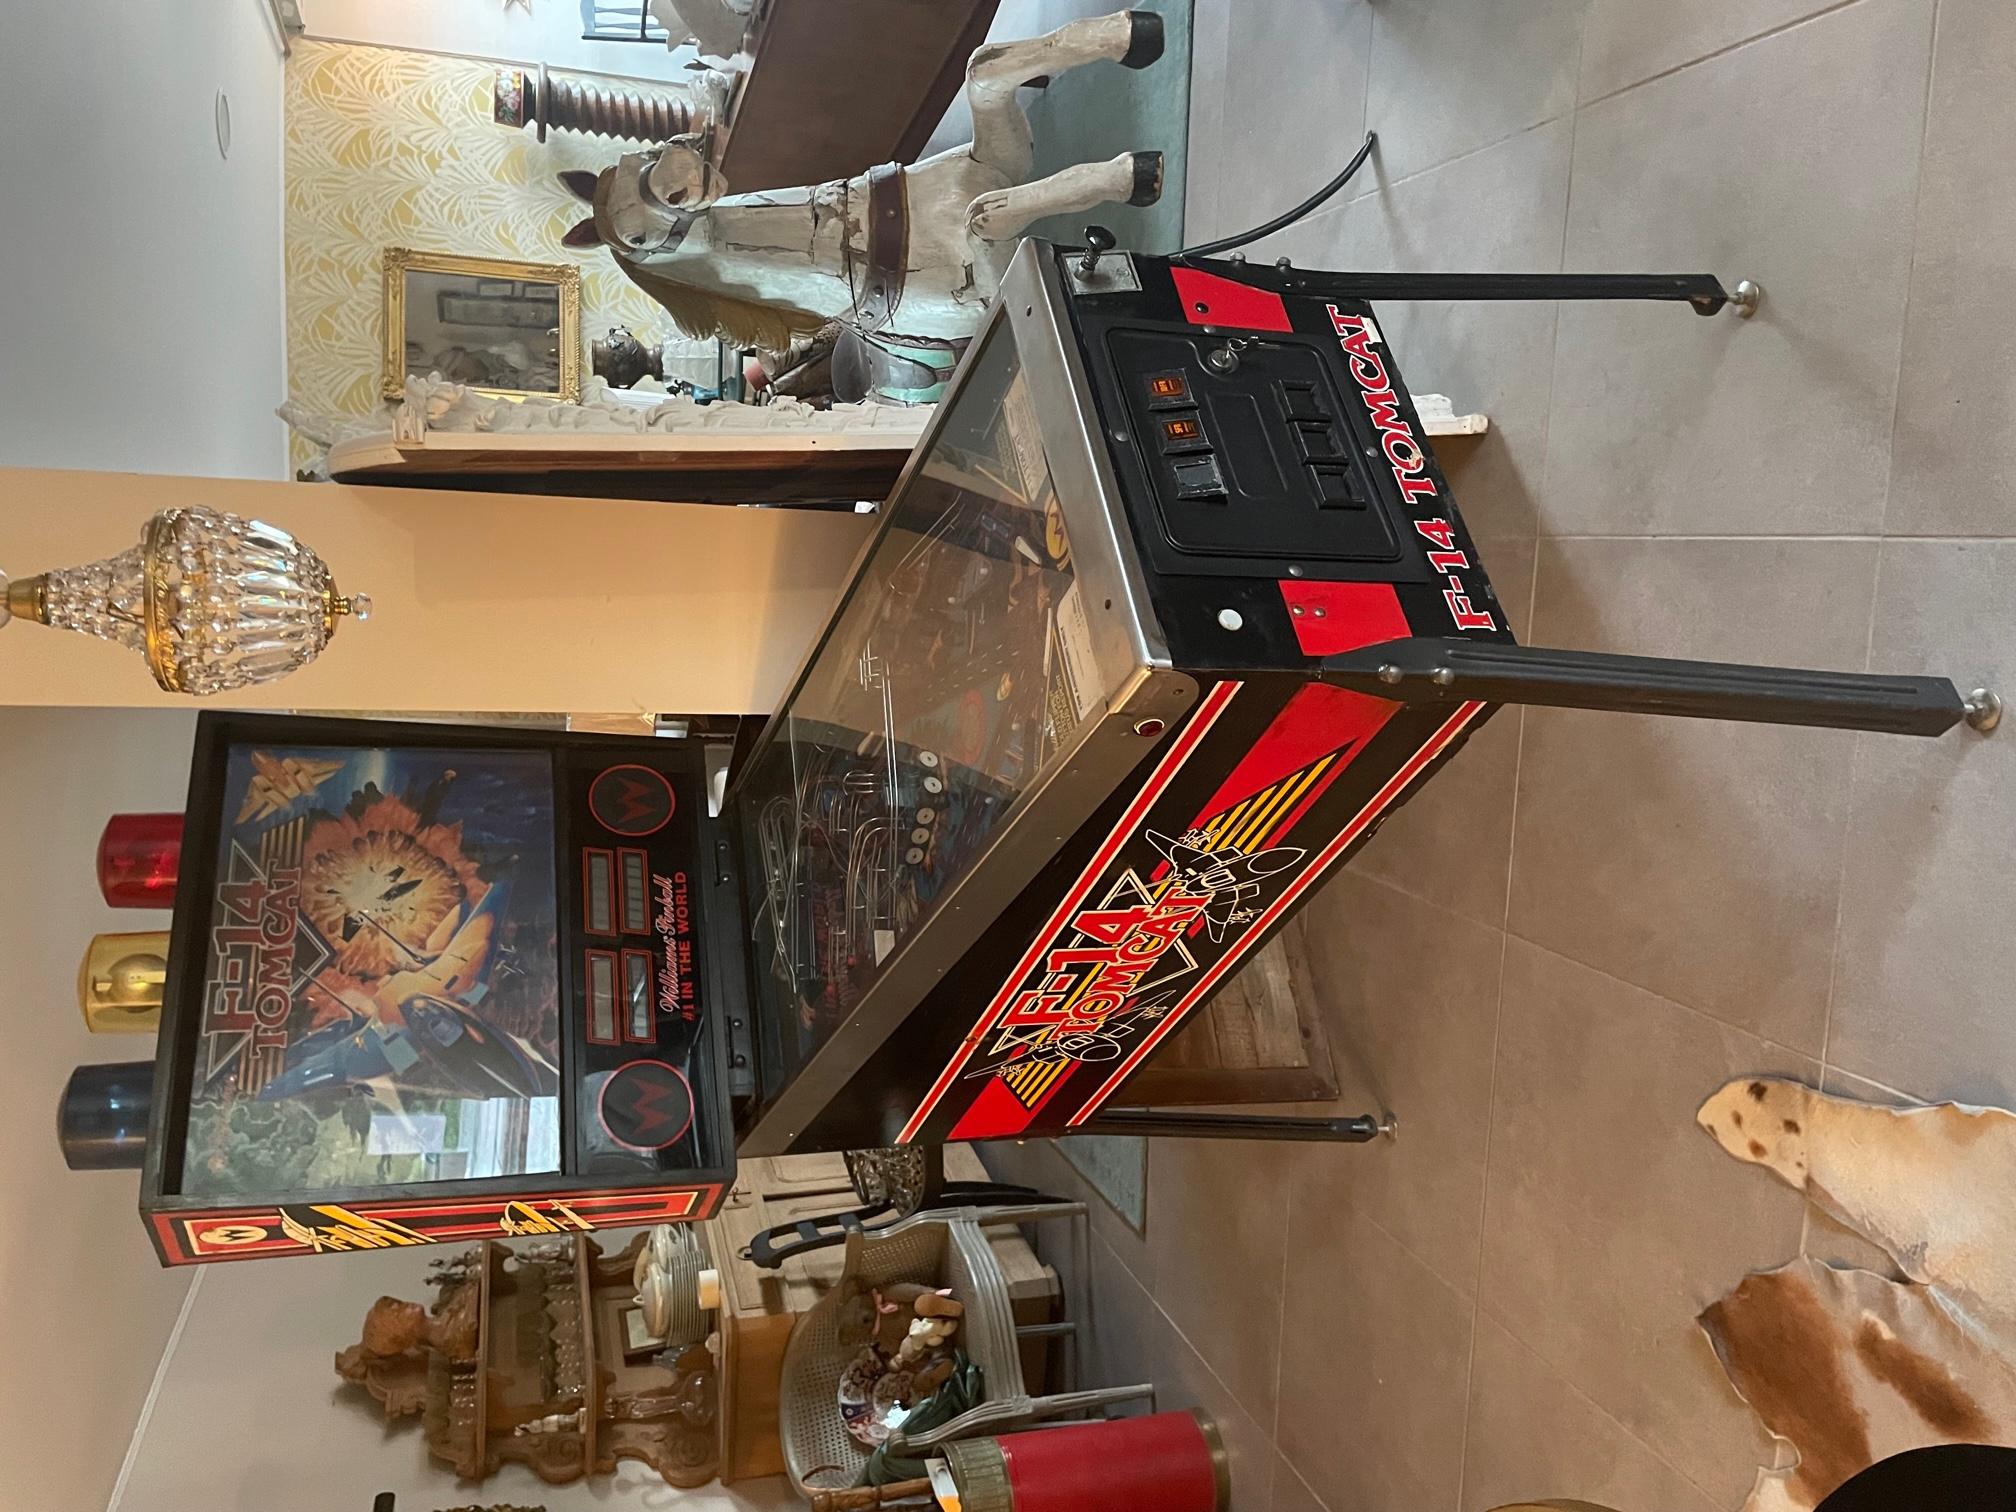 F-14 Tomcat is a pinball machine designed by Steve Ritchie and released by Williams Electronics in 1987. It features an F-14 Tomcat theme and was advertised with the slogan “It’s fast. It’s furious. And it fights back!”
Players assume the role of a